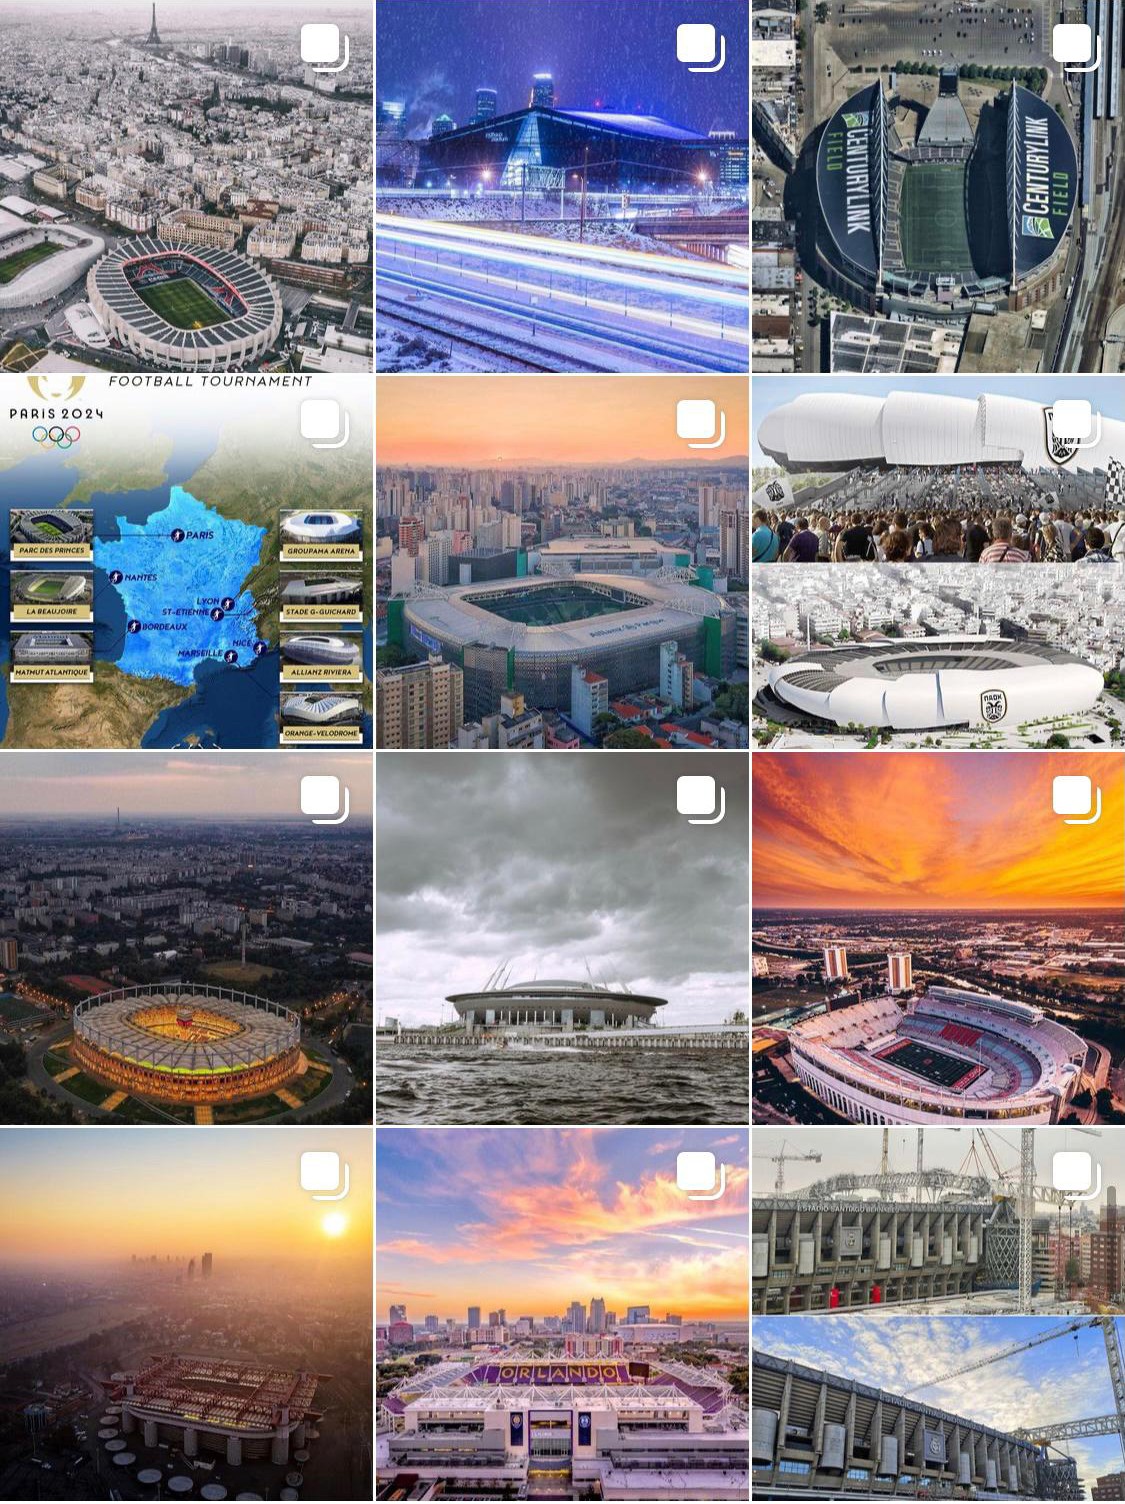 Join StadiumDB.com on Instagram to keep up with the best photos and current news